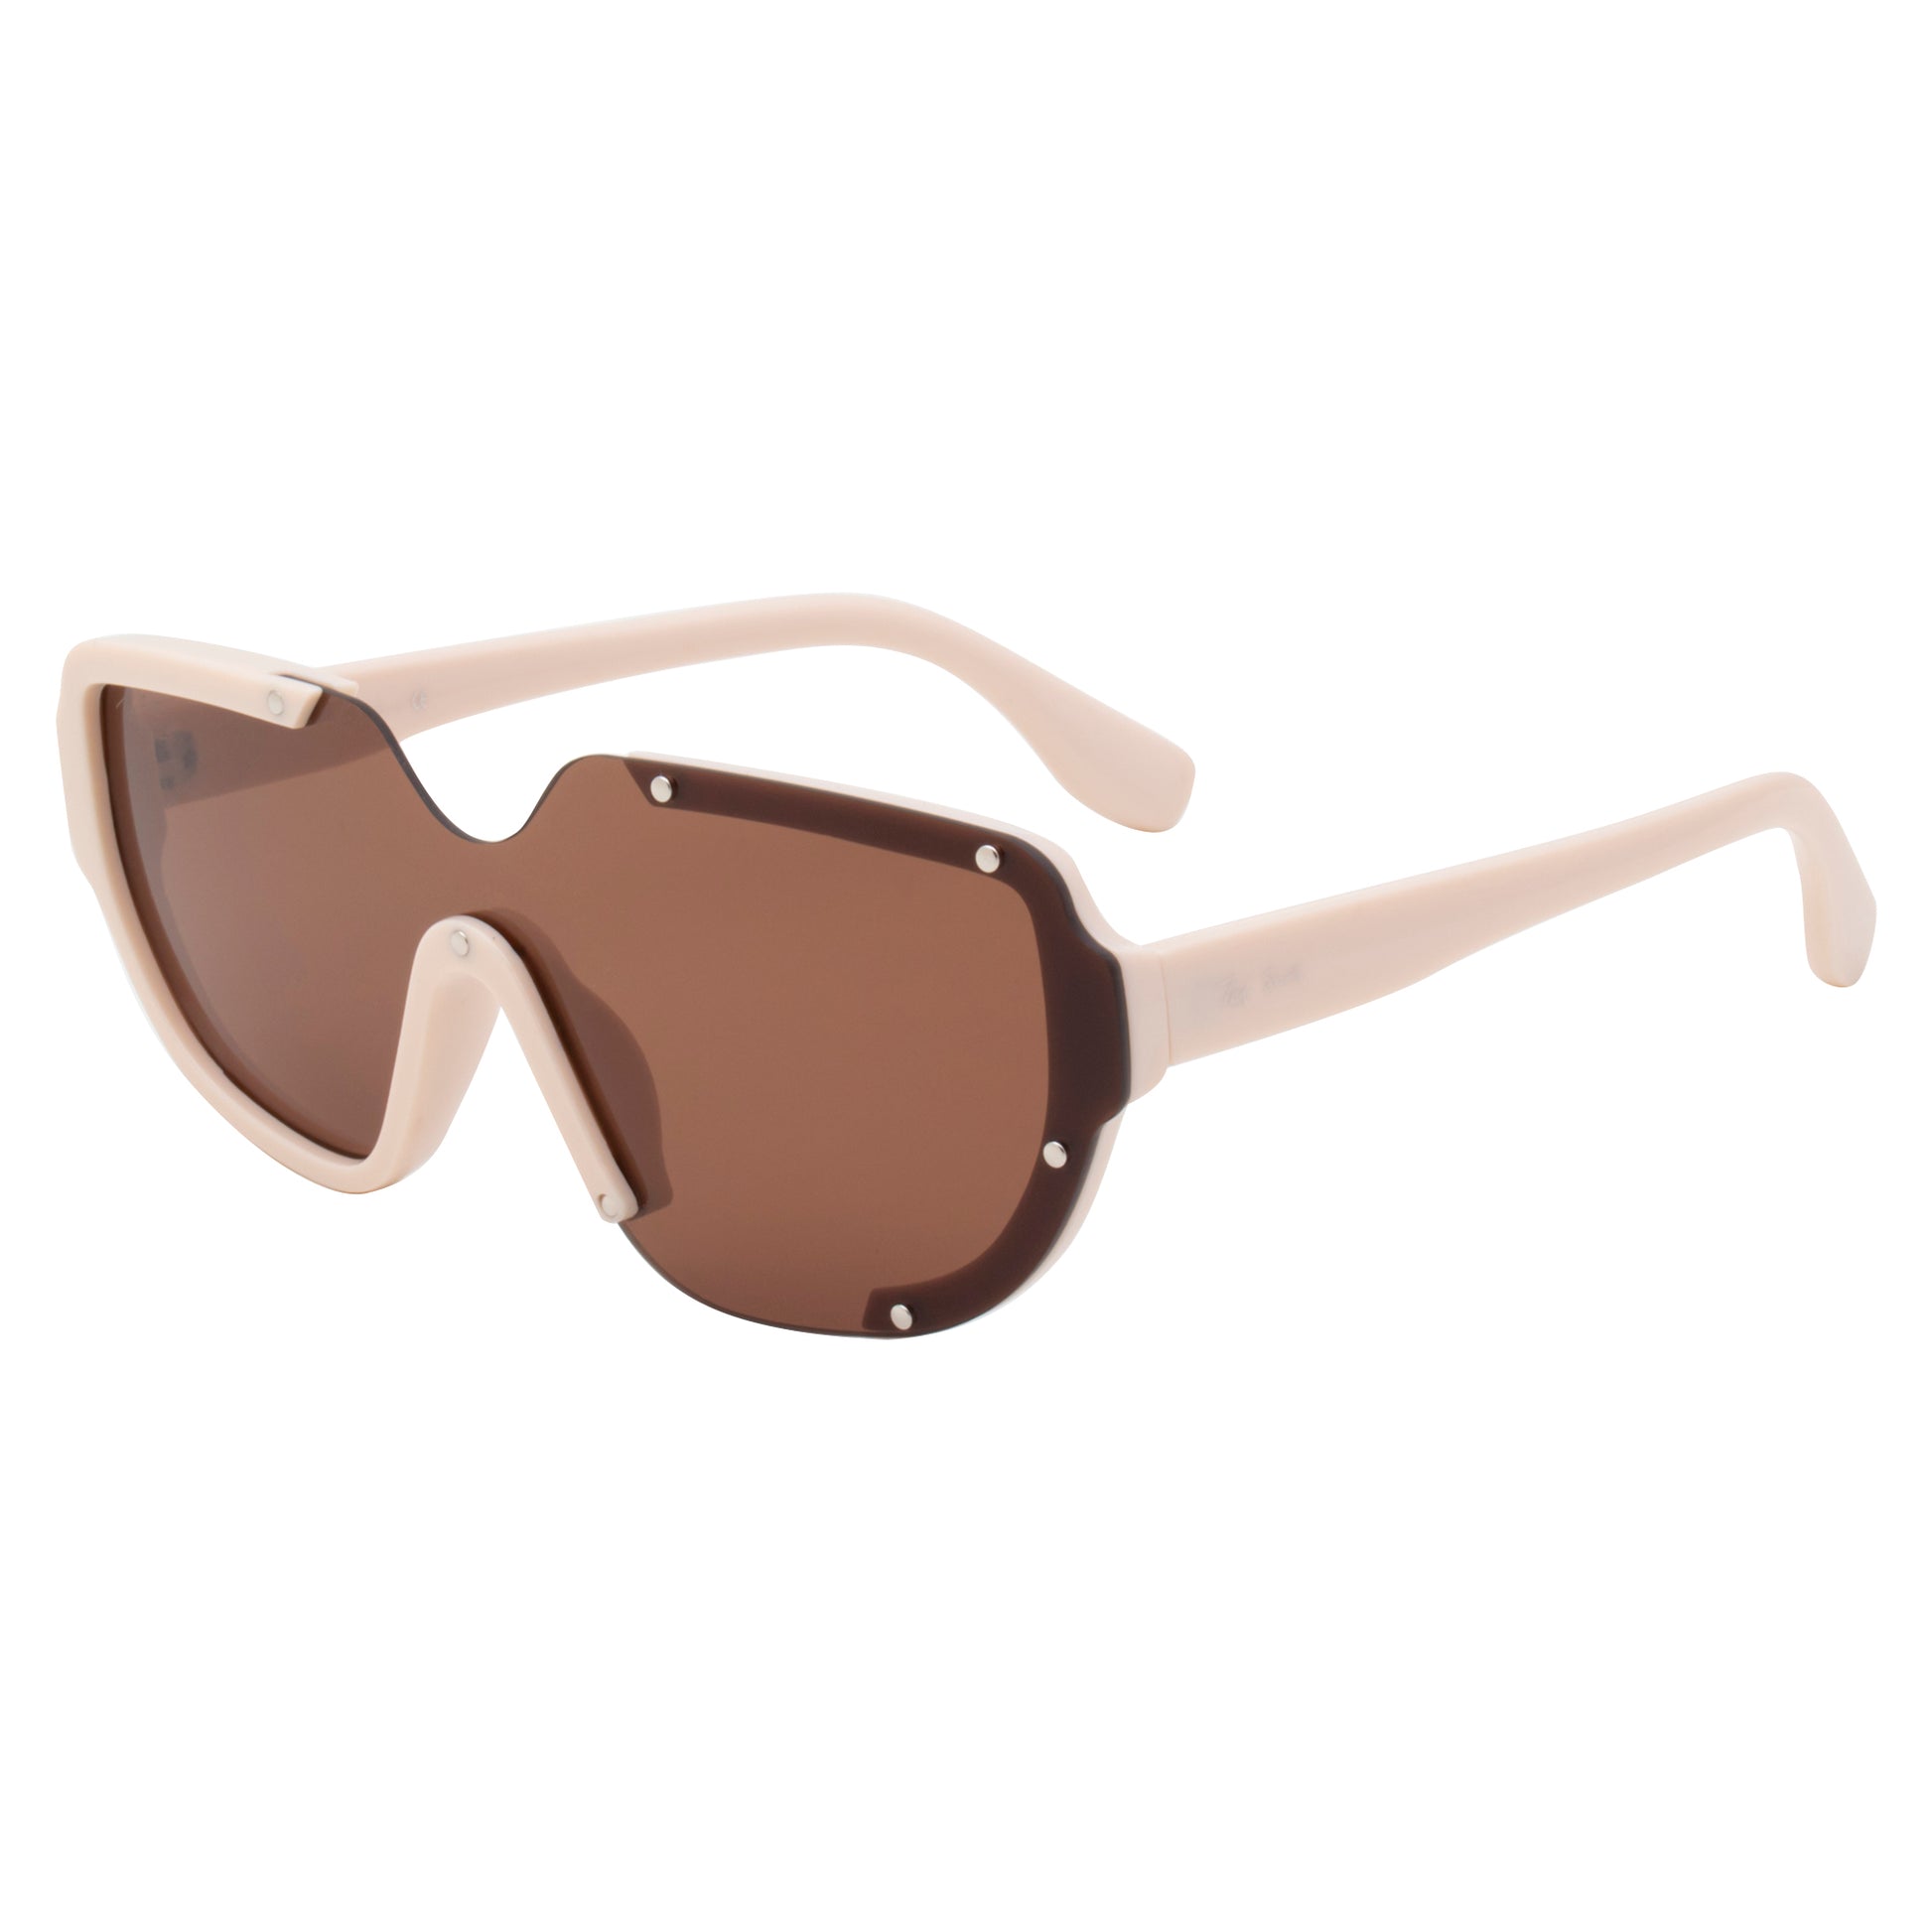 TED SMITH UV Protection Shield Sunglasses for Men Women Stylish Trending  Fashion Nuface_C4: Buy TED SMITH UV Protection Shield Sunglasses for Men  Women Stylish Trending Fashion Nuface_C4 Online at Best Price in